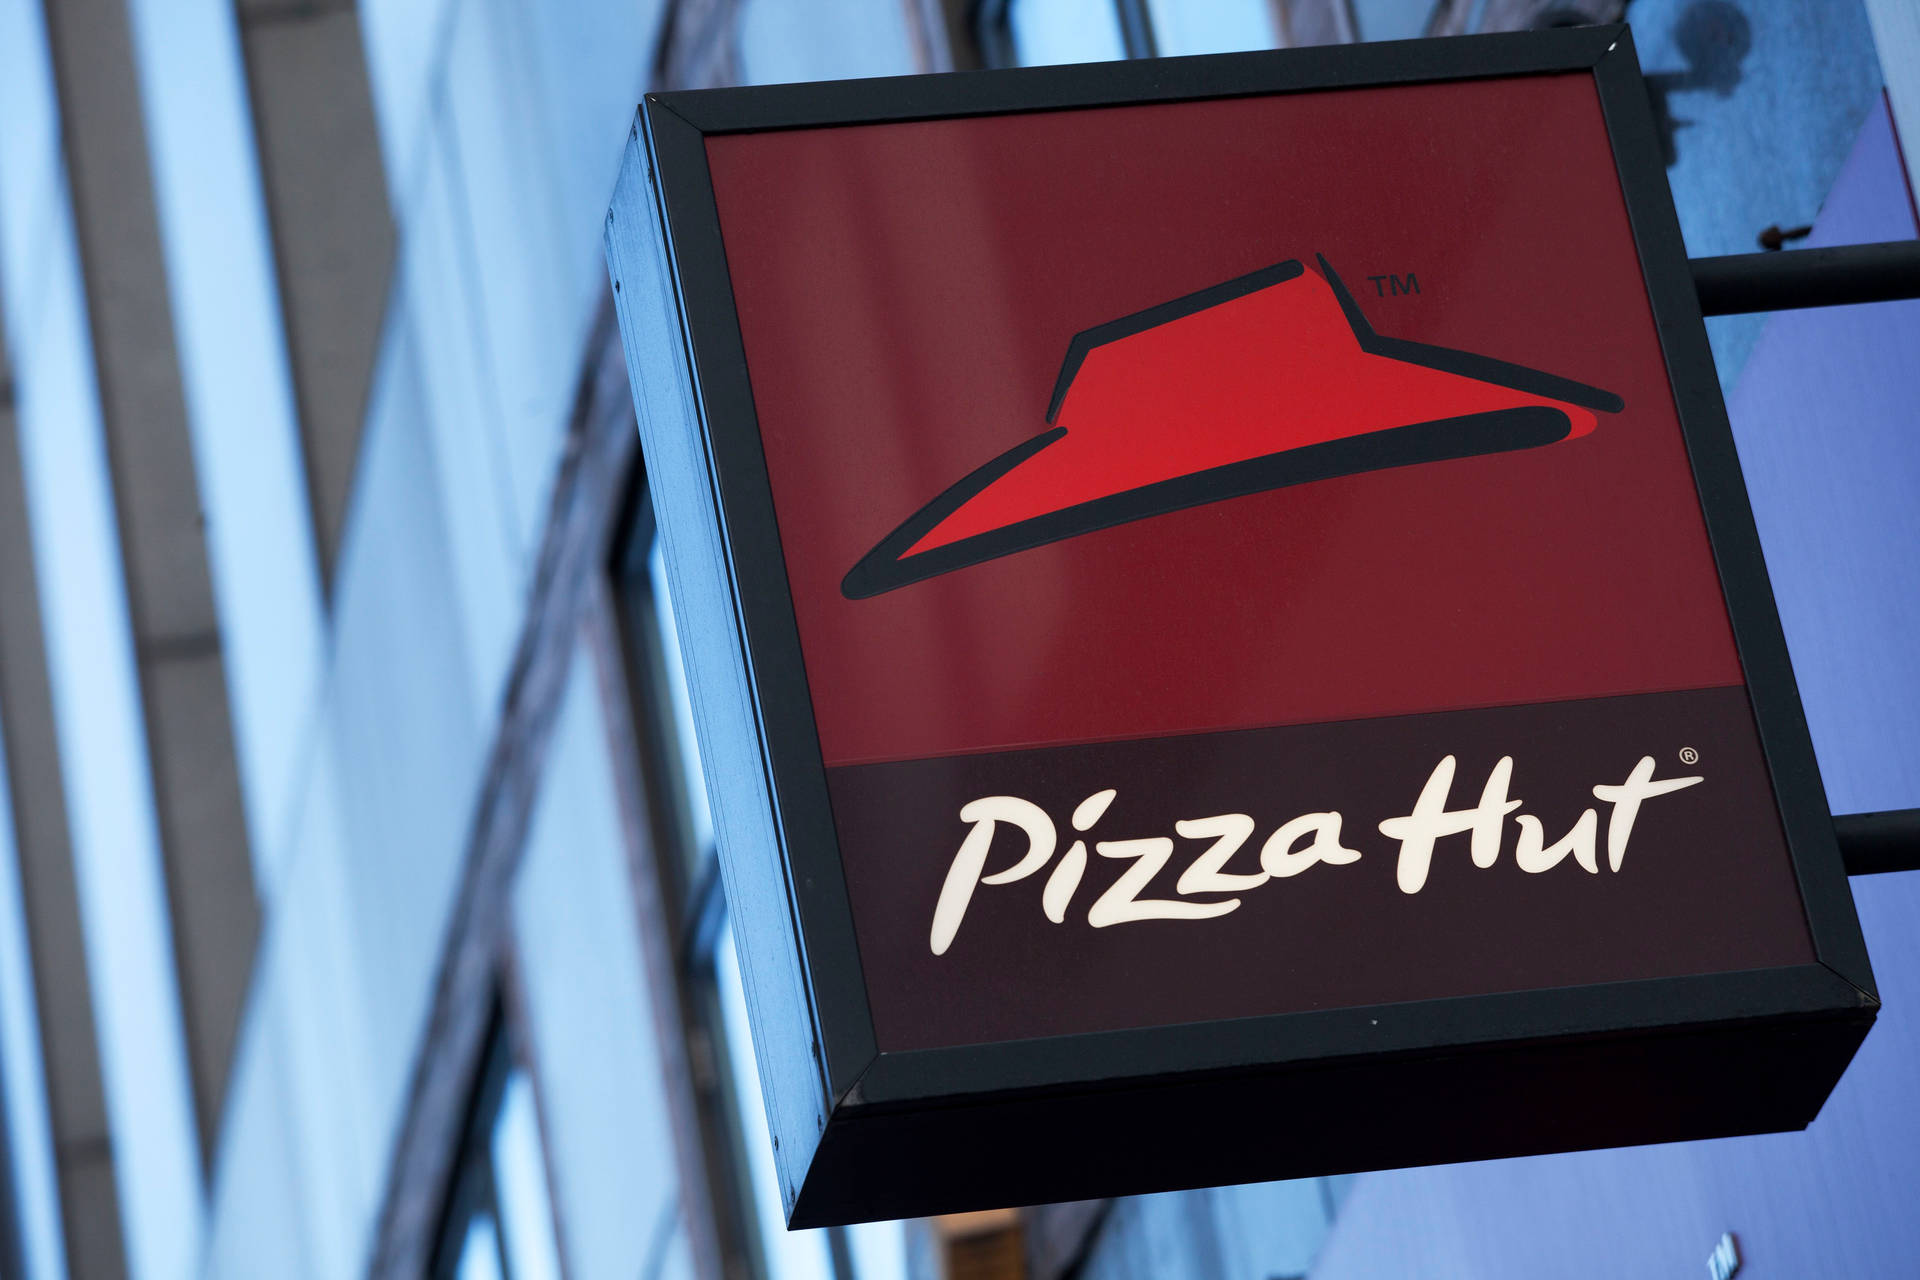 Pizza Hut Projecting Signage